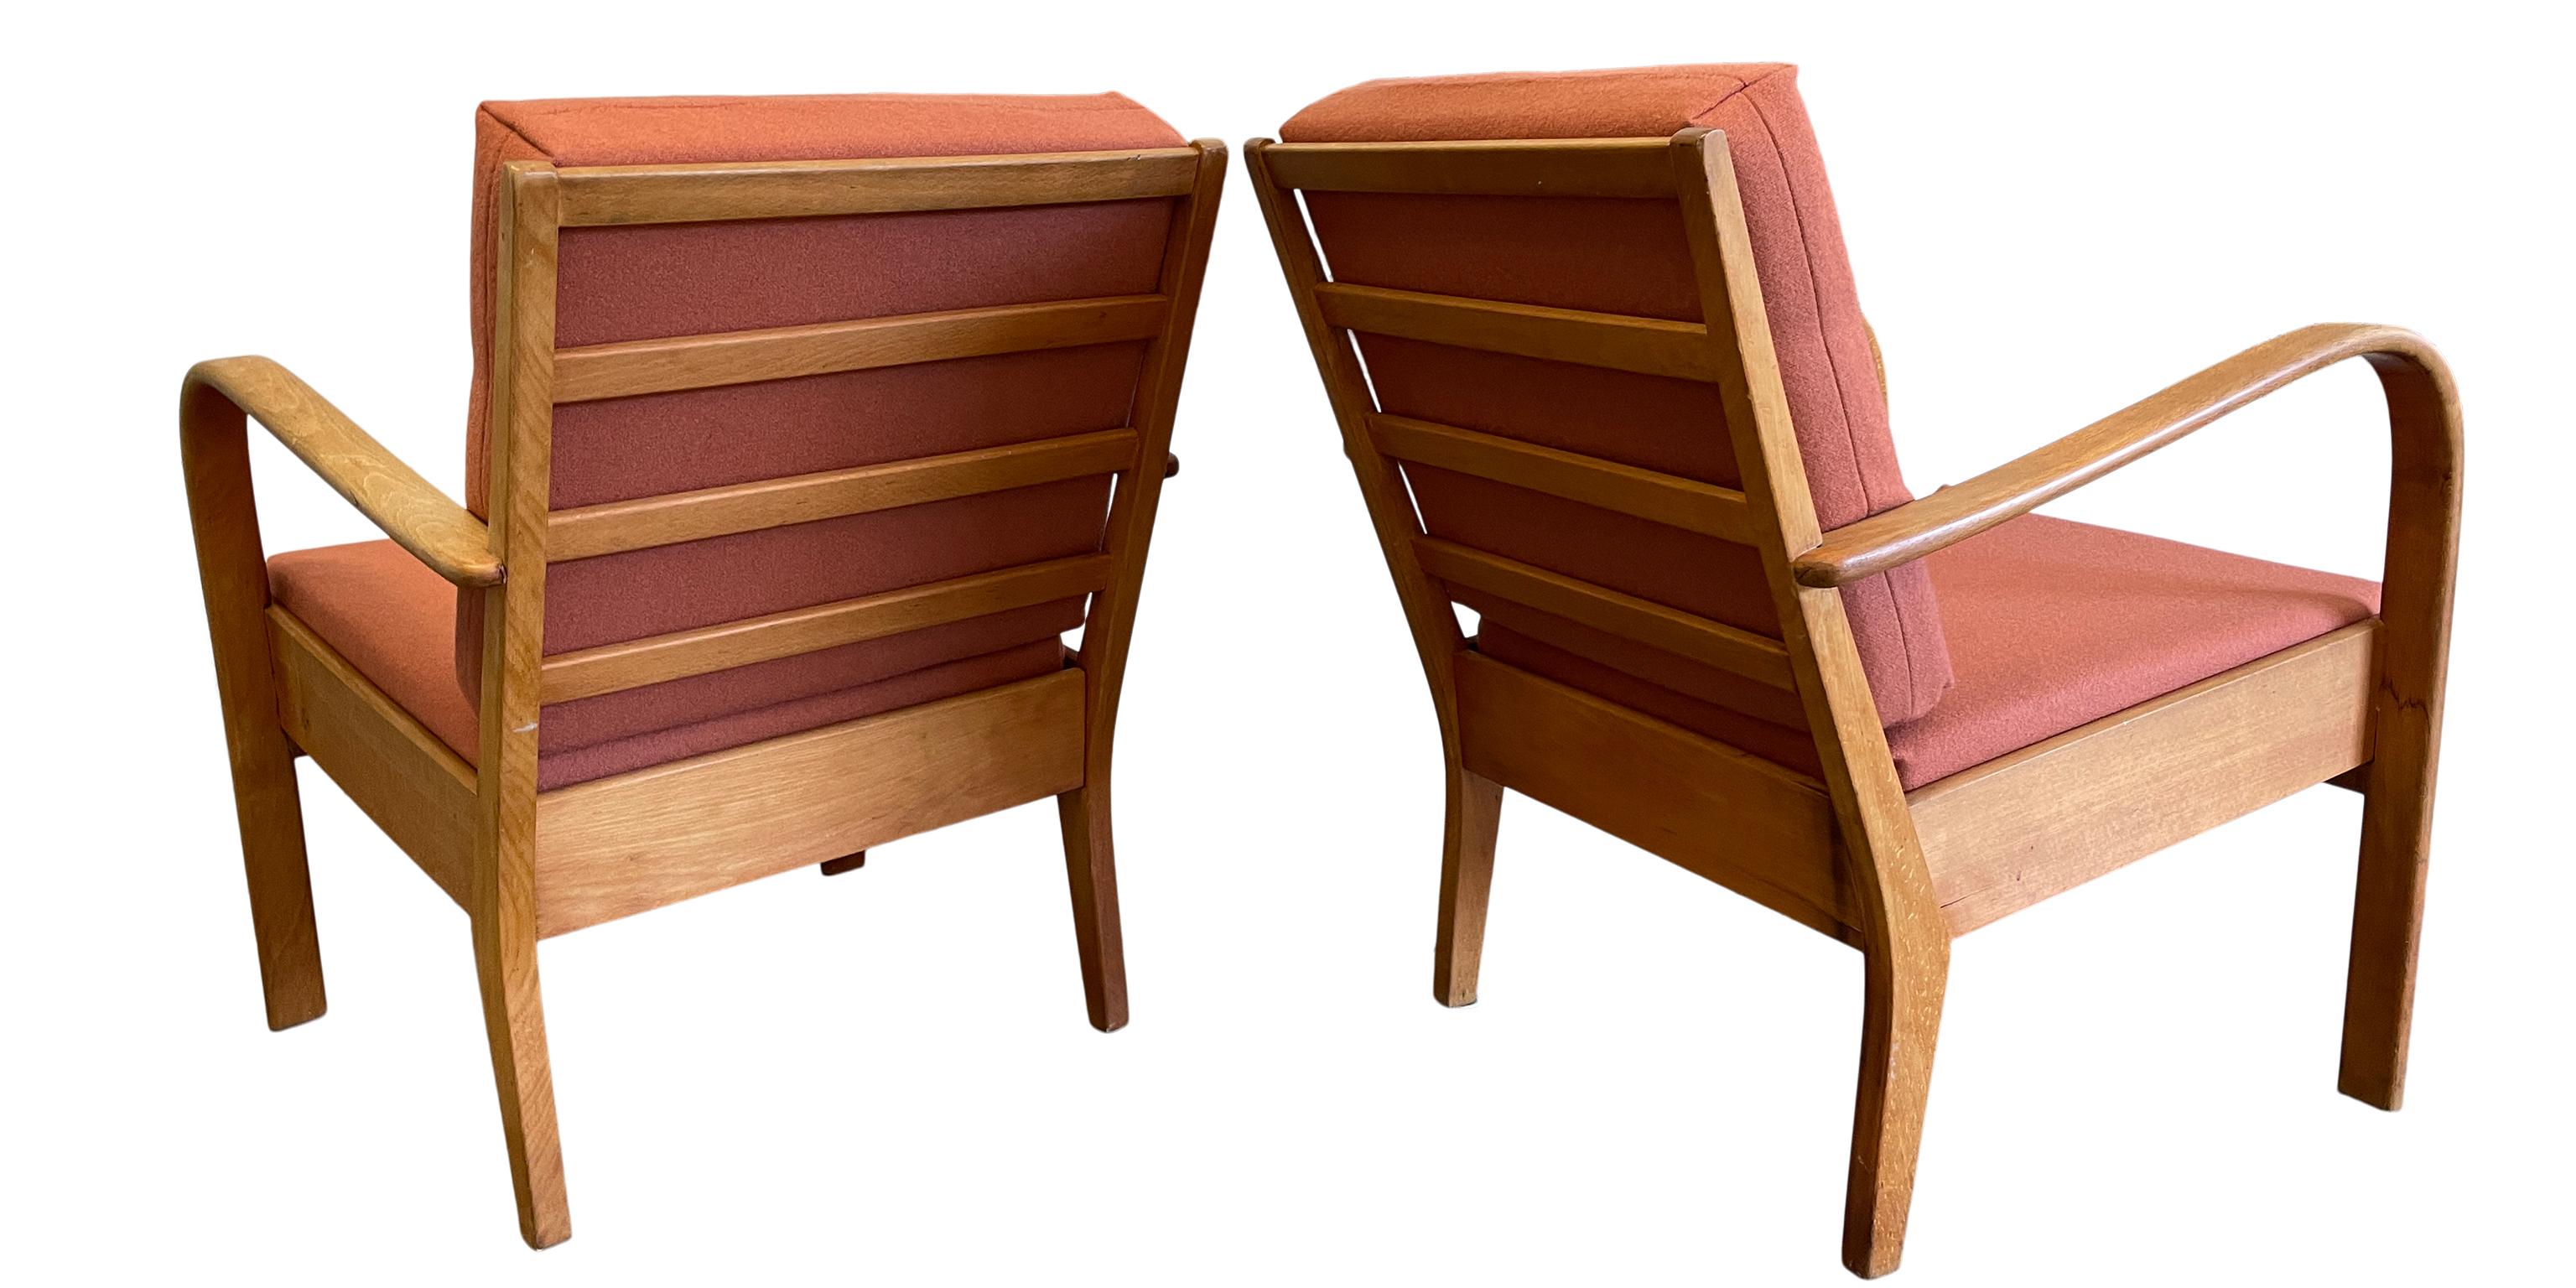 Woodwork Pair of Midcentury Swedish Low Bent Wood Arm Chairs Lounge Chairs For Sale